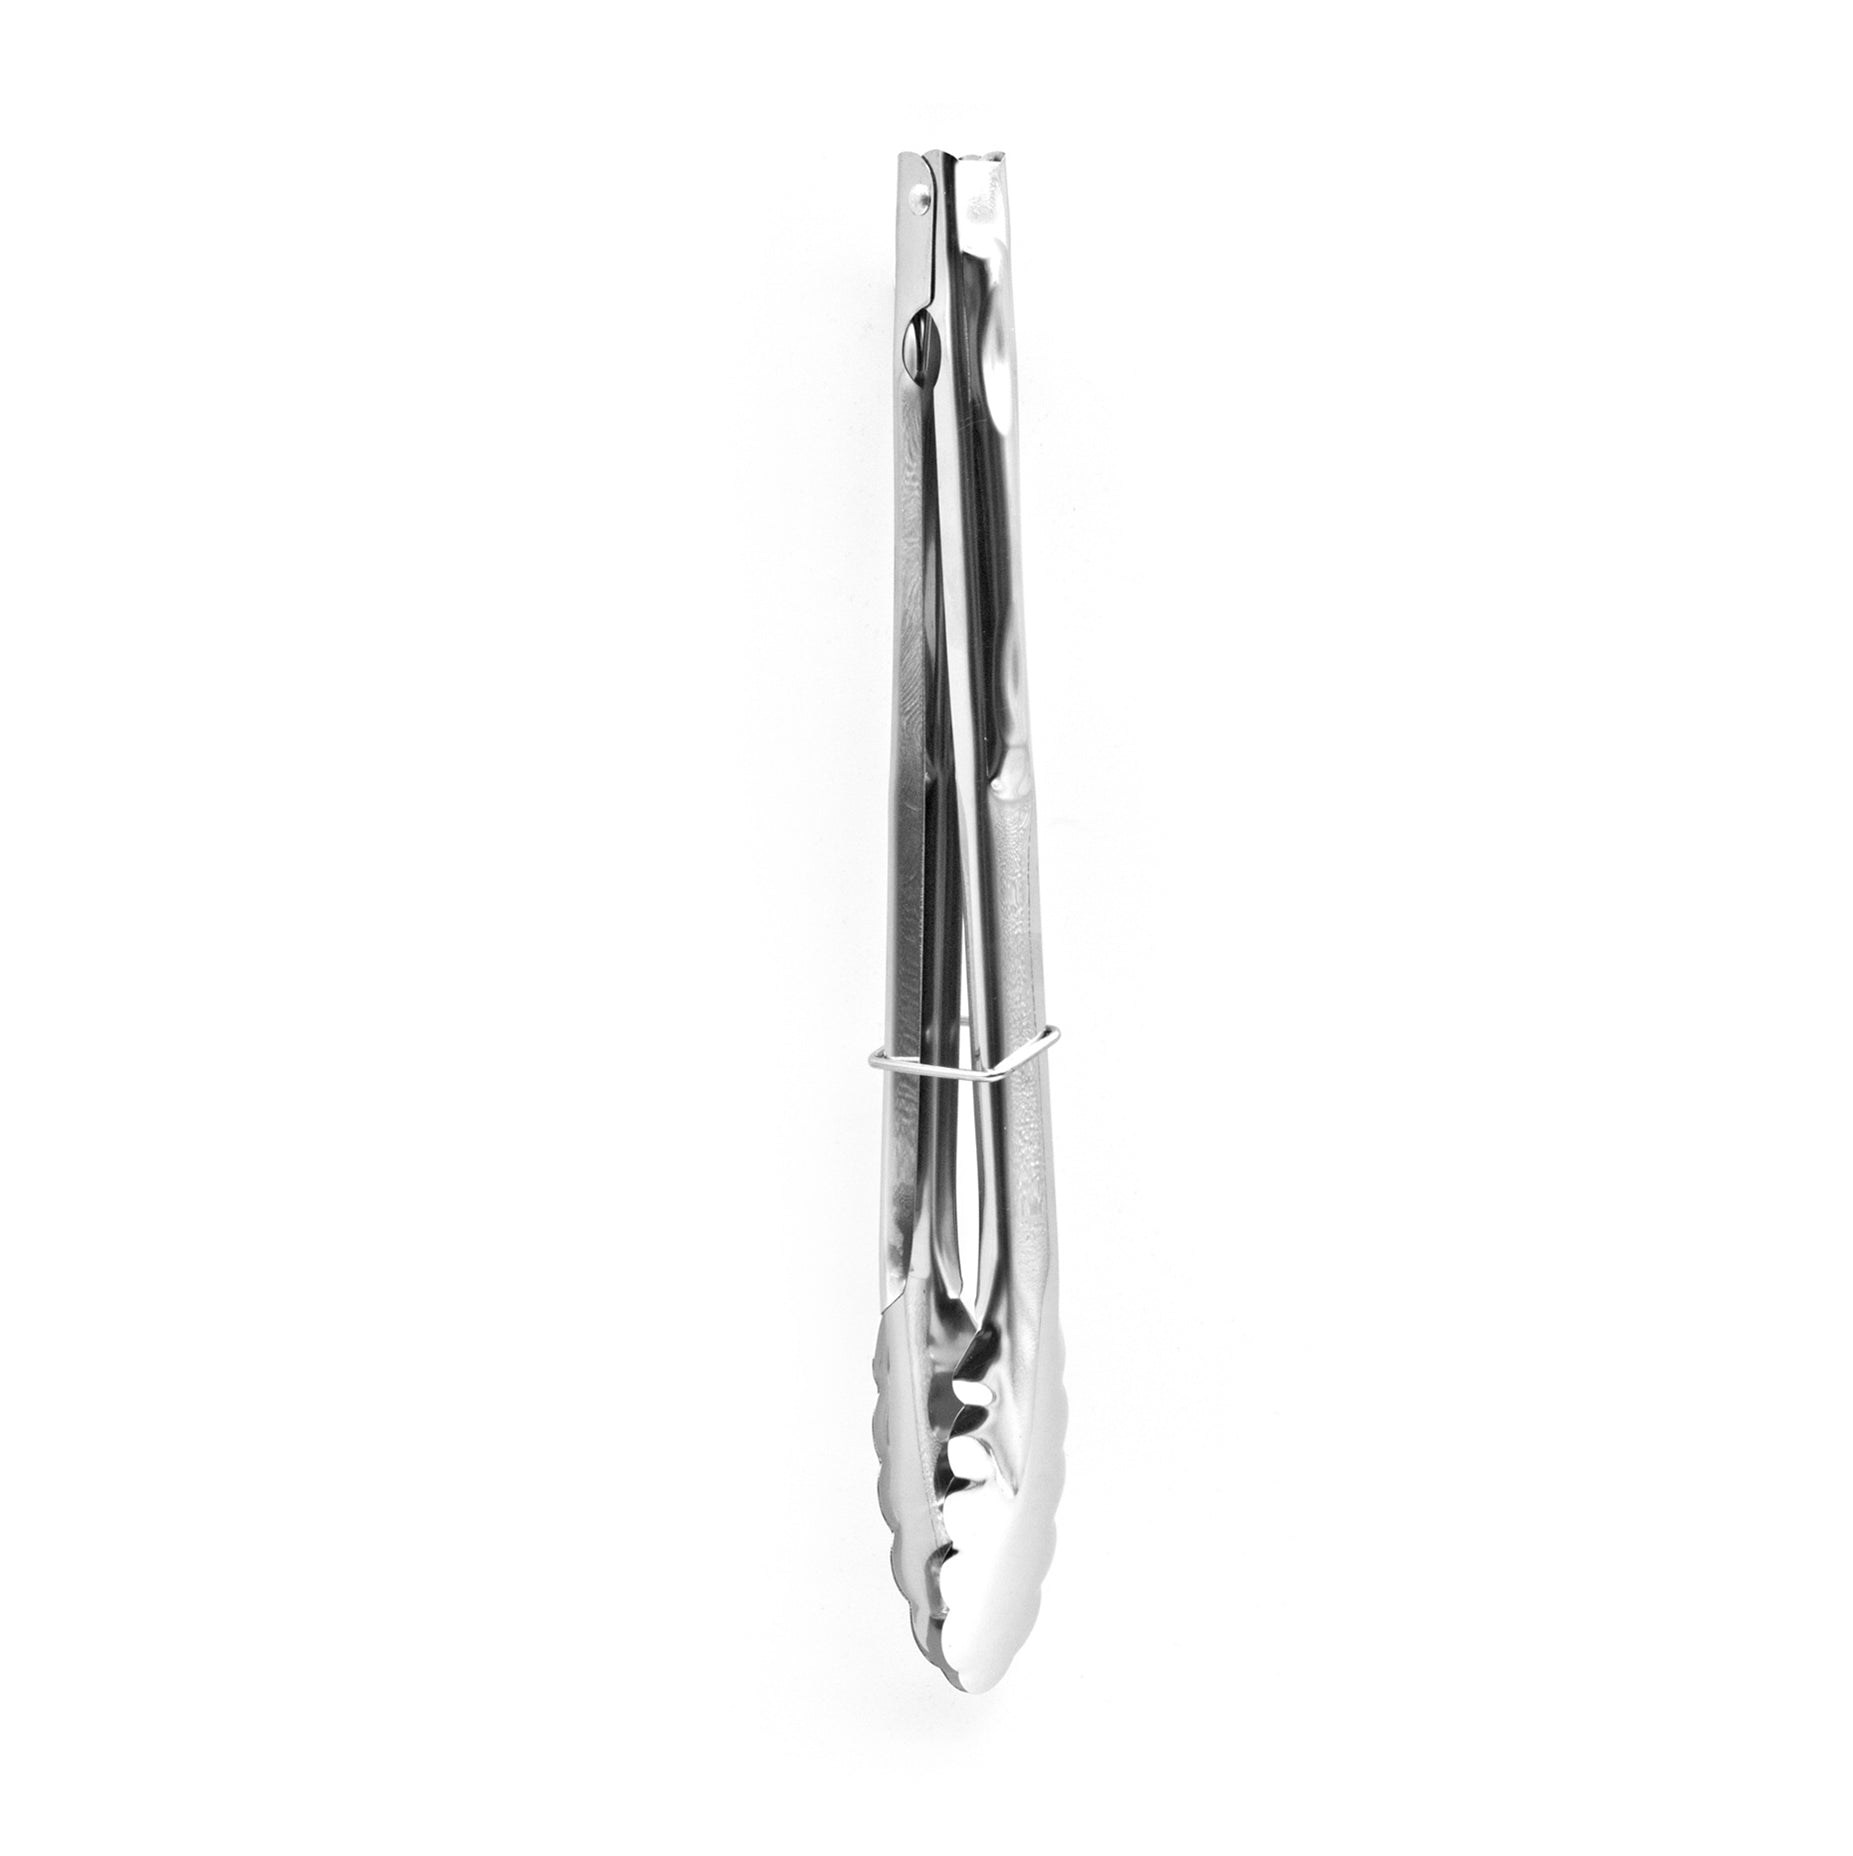 Stainless Steel Cooking Tongs - 30 cm